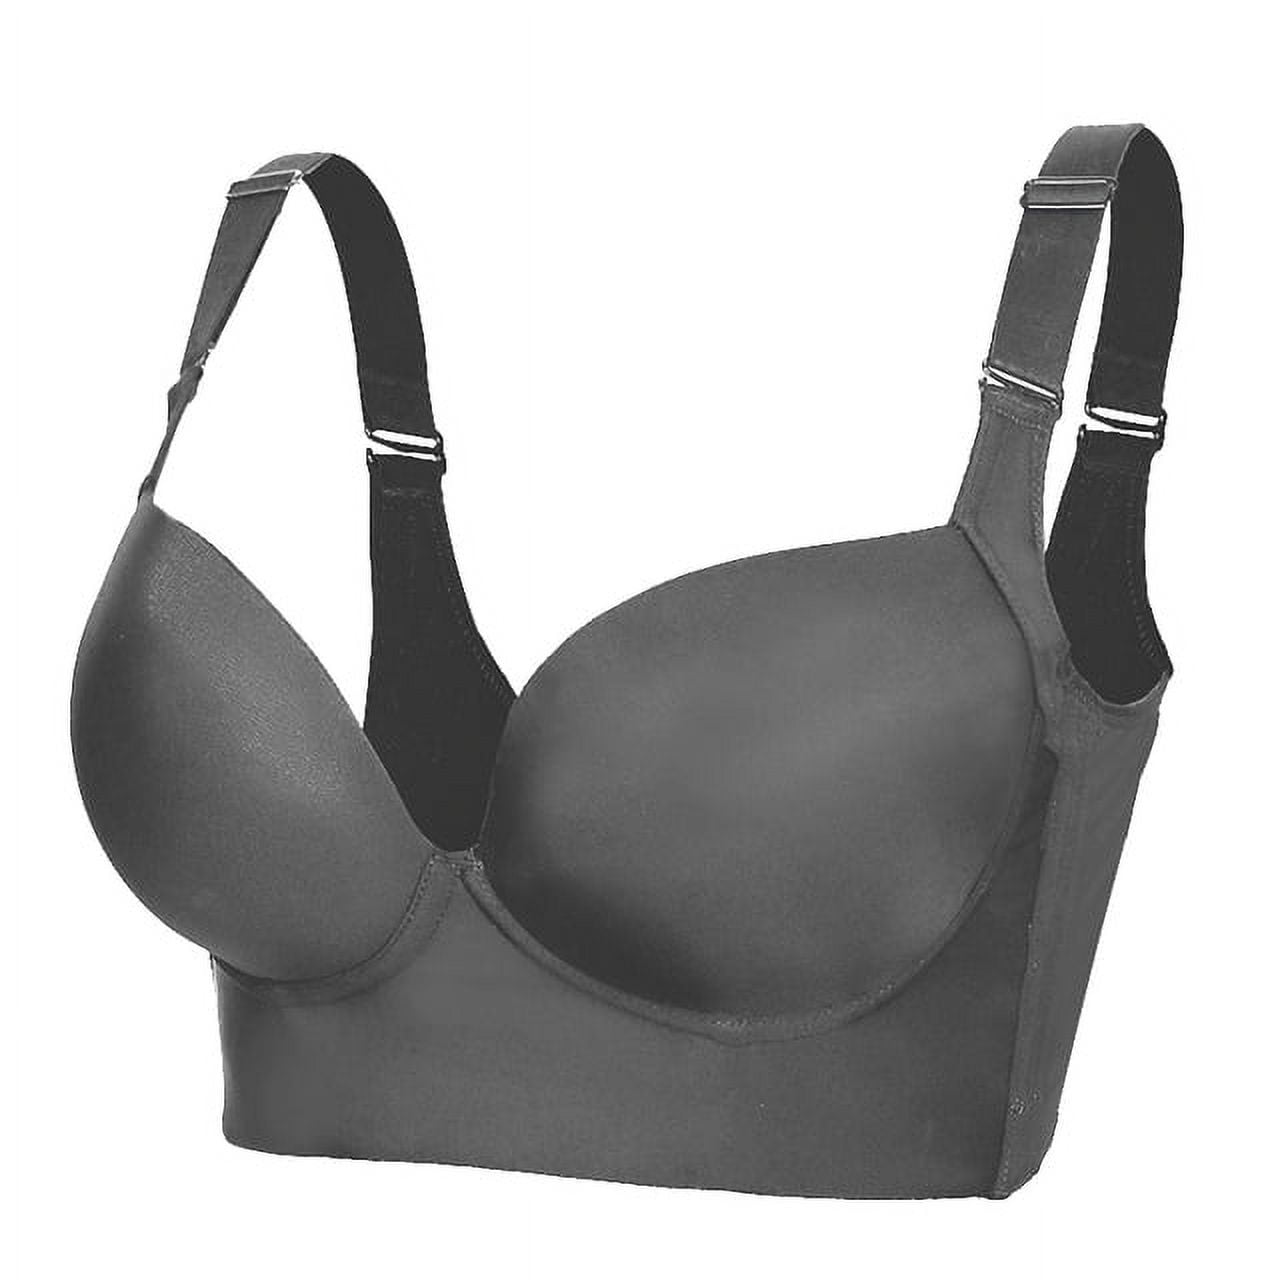 FallSweet Plus Size Deep Cup Push Up Bra With Full Back Coverage